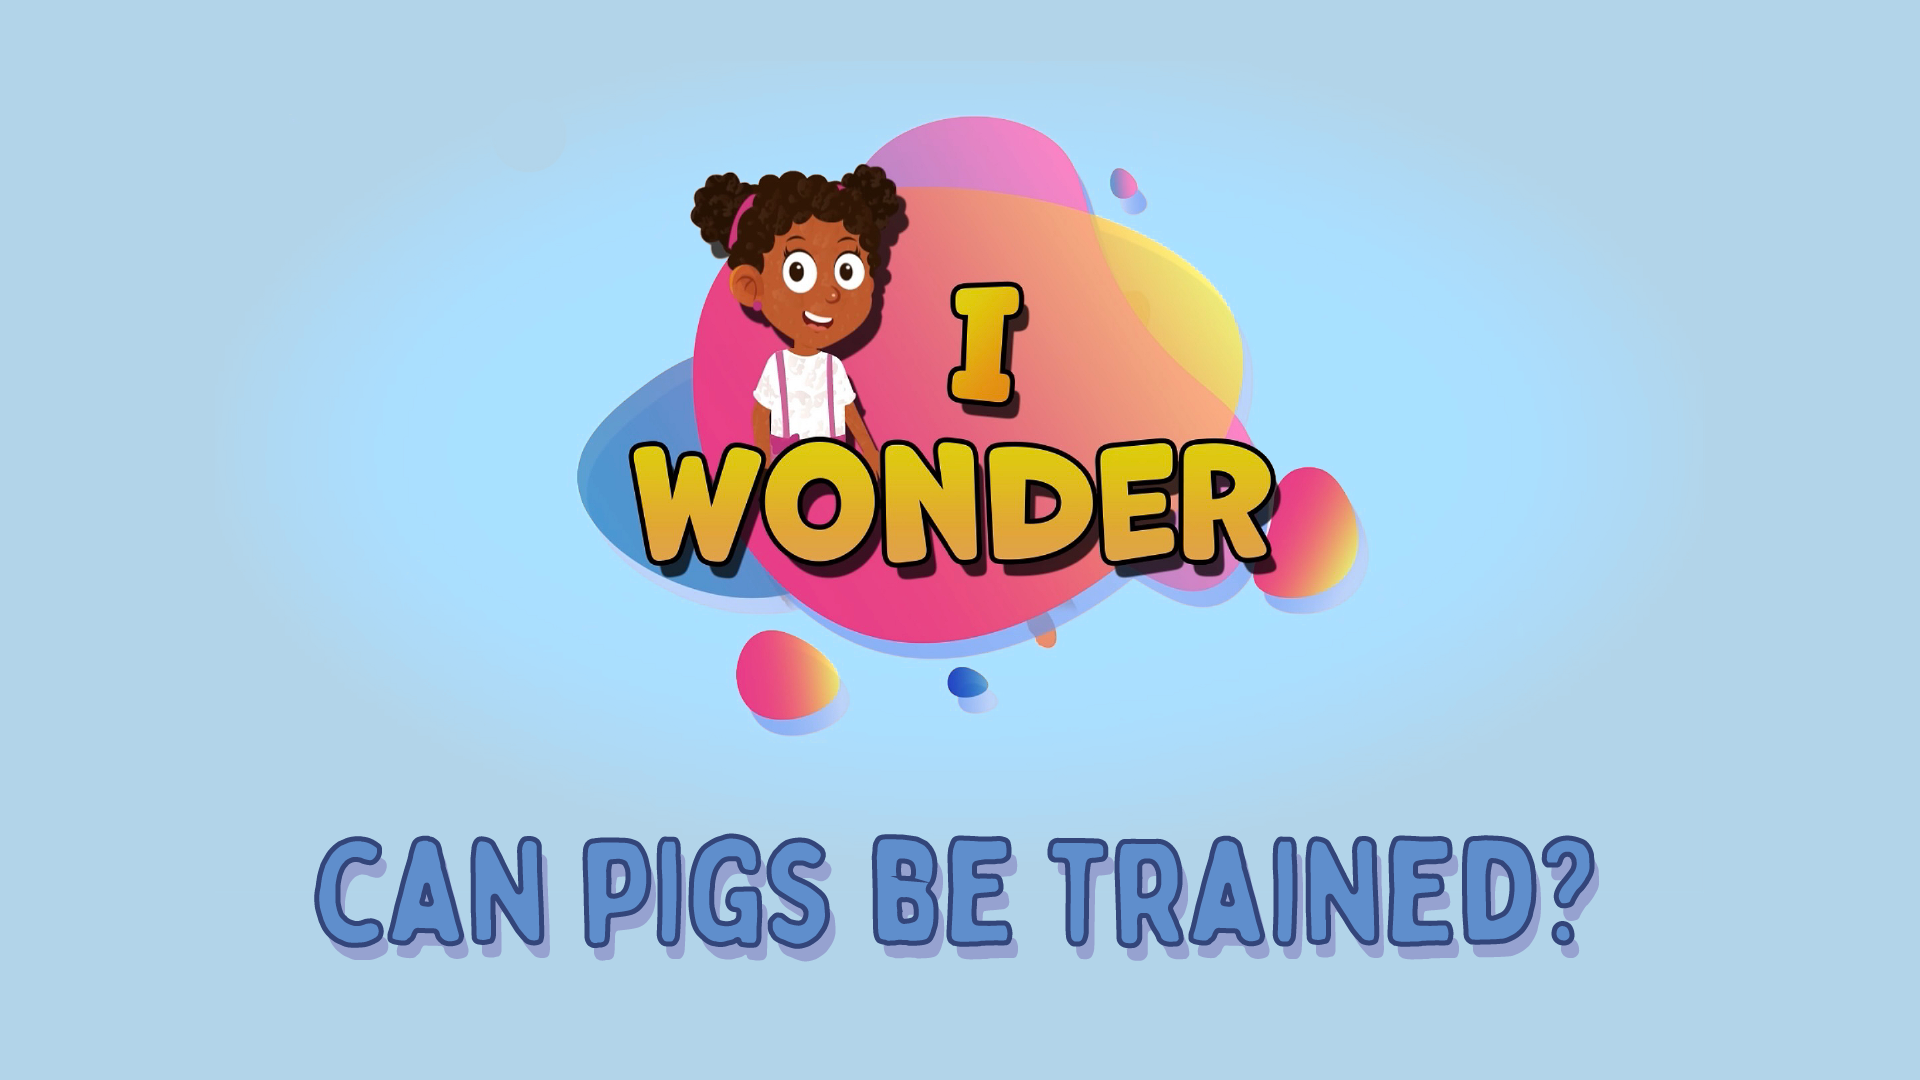 Can Pigs Be Trained?